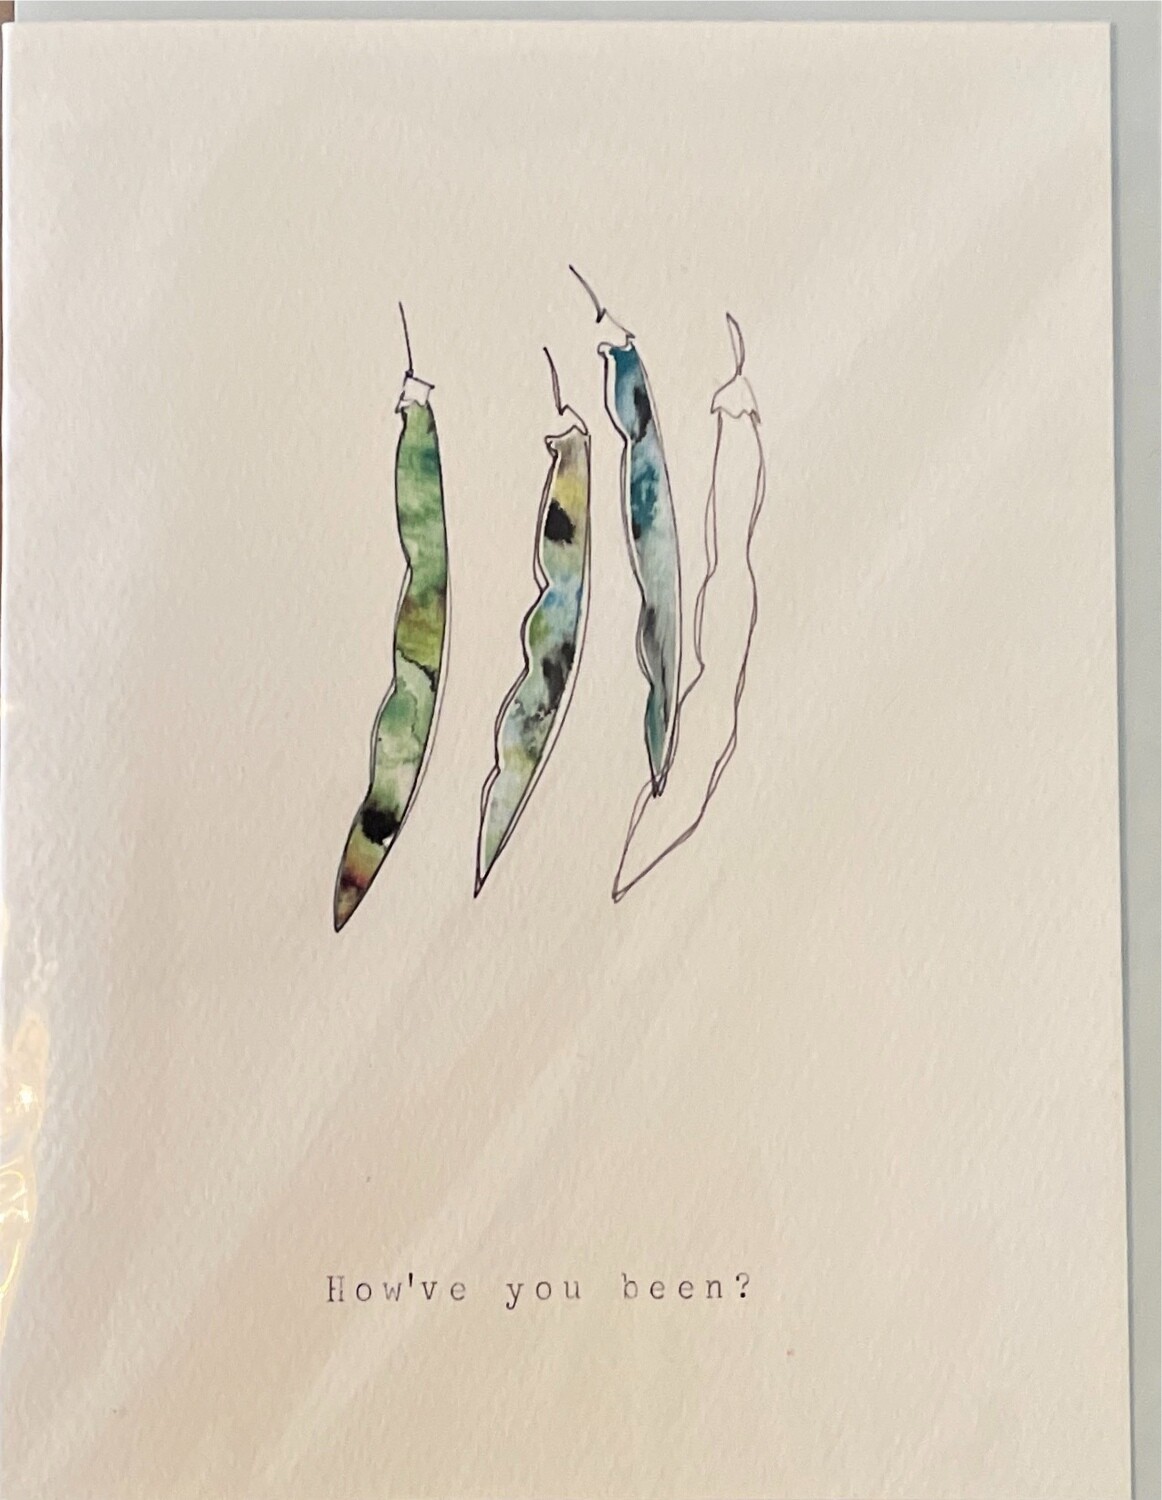 Card - "How've you been?" Peas in Pod